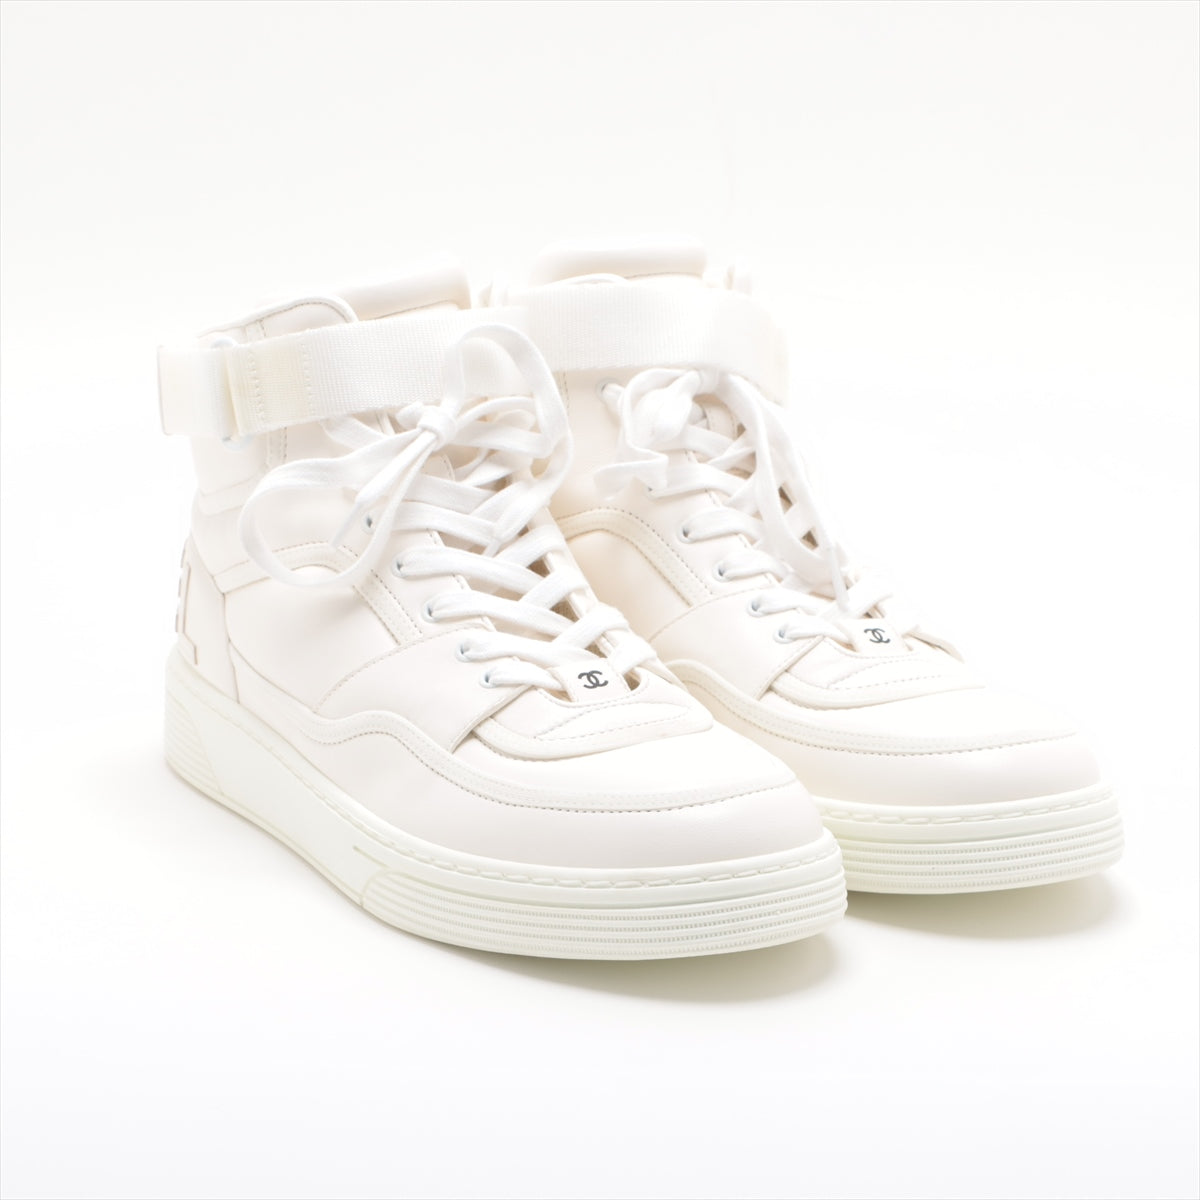 Chanel Coco Mark Leather High-top Sneakers 41 Men's White G35062 Is there a replacement string